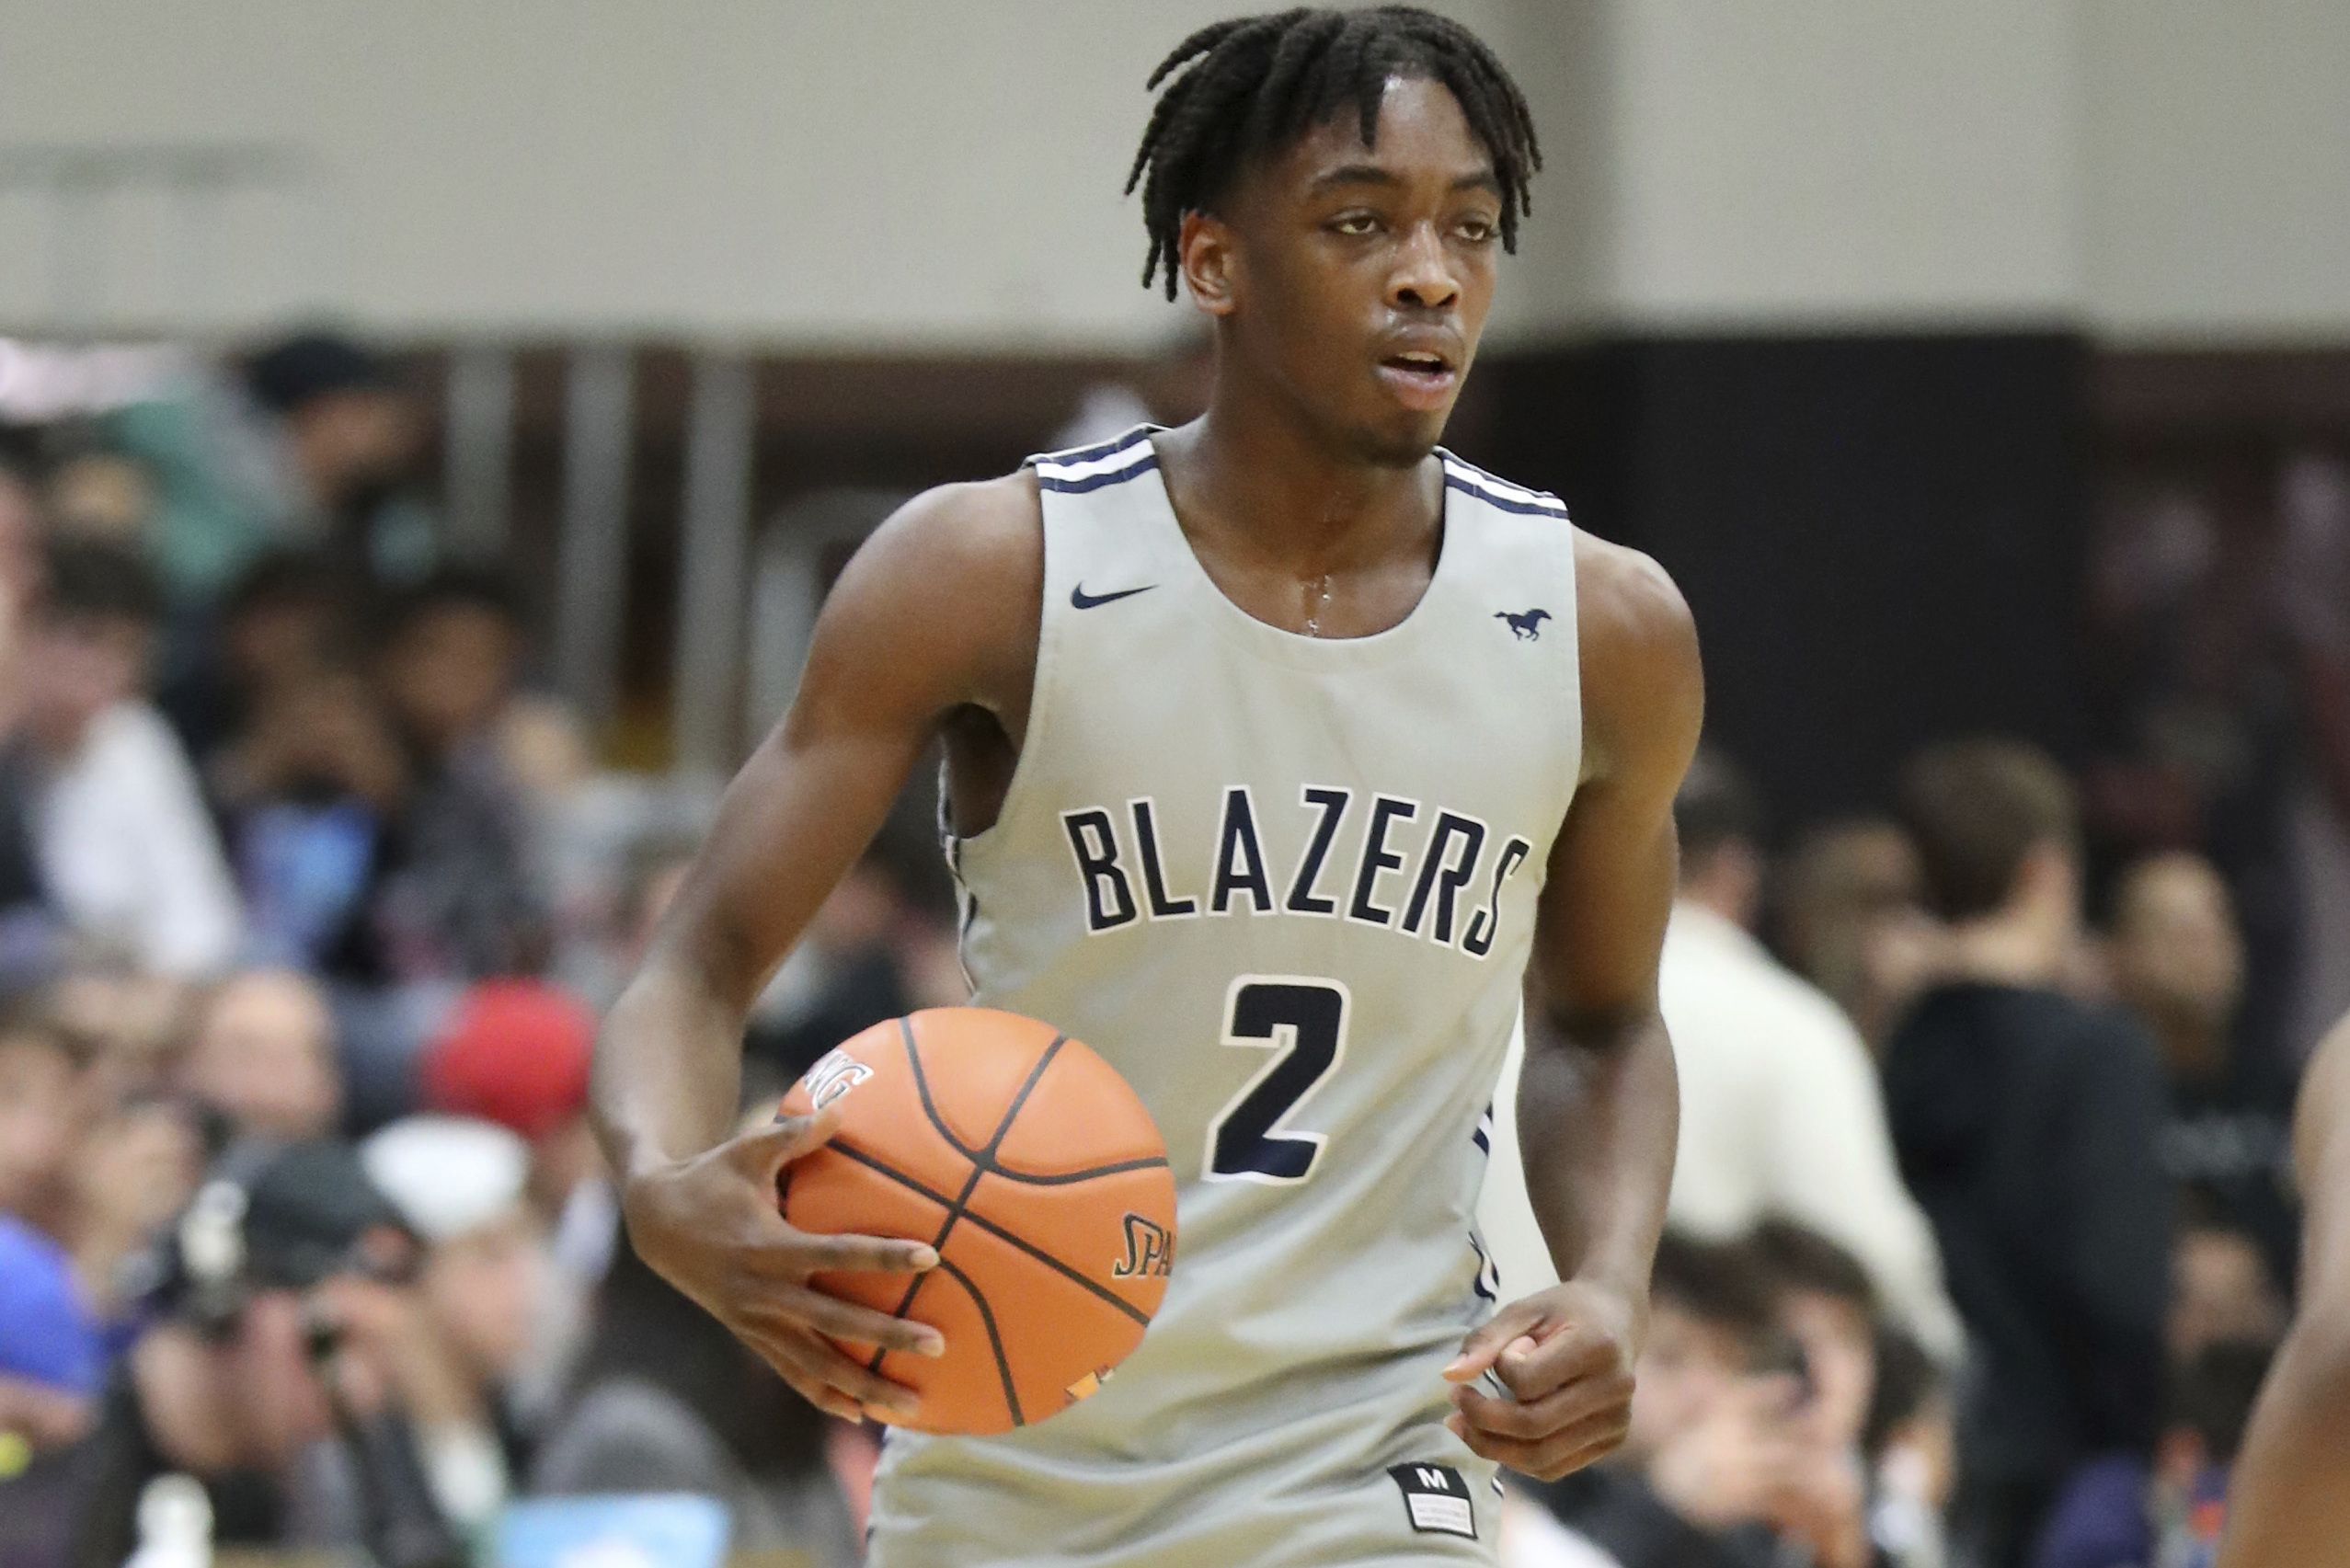 Dwyane Wade's Son Zaire to Join Brewster Academy After Sierra Canyon Graduation. Bleacher Report. Latest News, Videos and Highlights